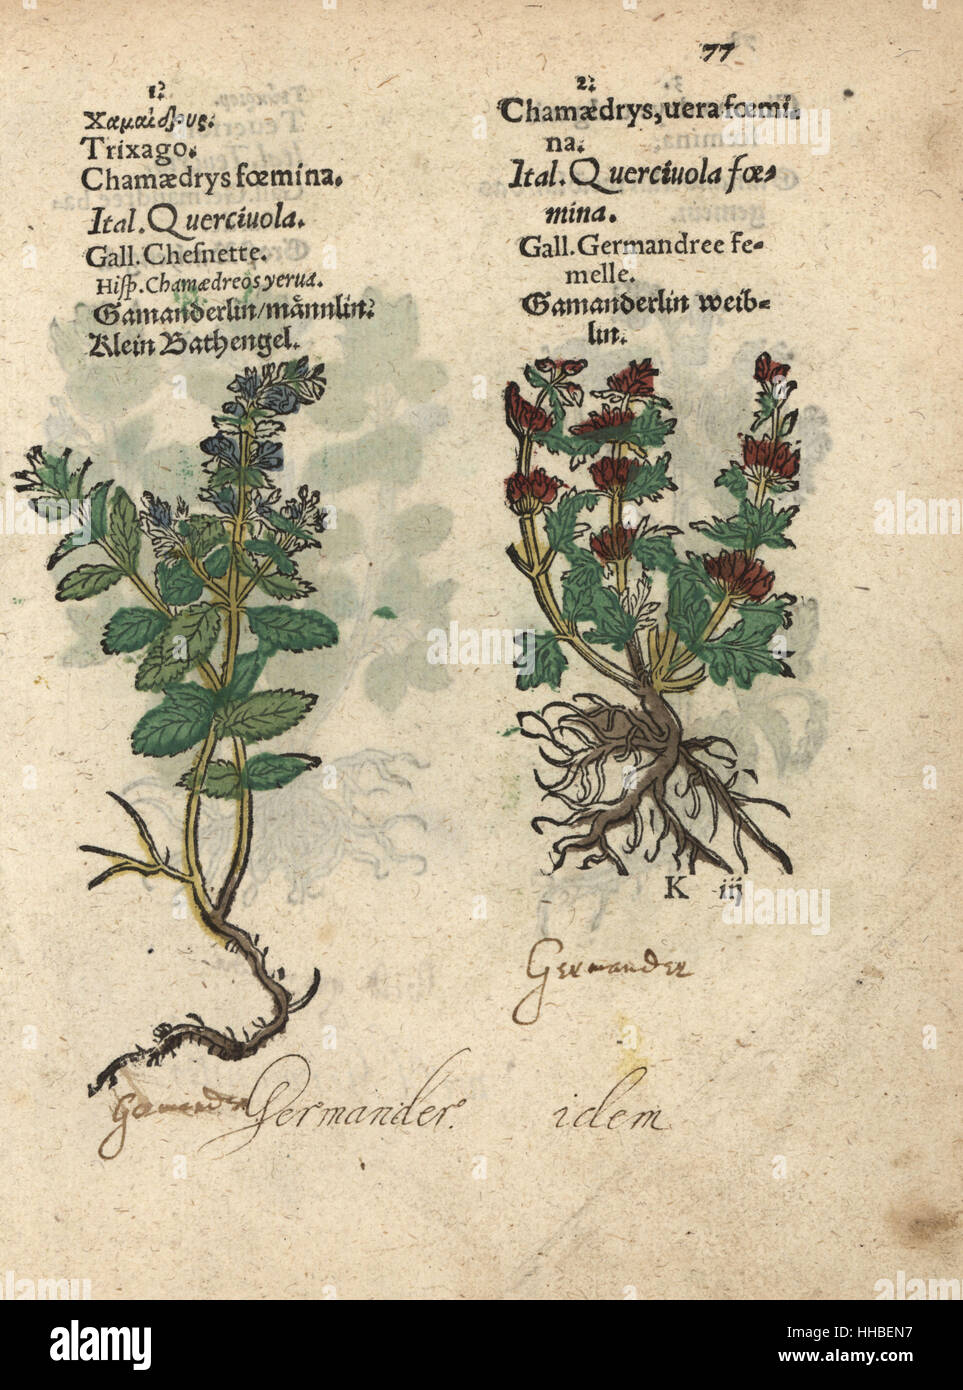 Cut-leaved germander, Teucrium botrys, and common germander, Teucrium chamaedrys. Handcoloured woodblock engraving of a botanical illustration from Adam Lonicer's Krauterbuch, or Herbal, Frankfurt, 1557. This from a 17th century pirate edition or atlas of illustrations only, with captions in Latin, Greek, French, Italian, German, and in English manuscript. Stock Photo